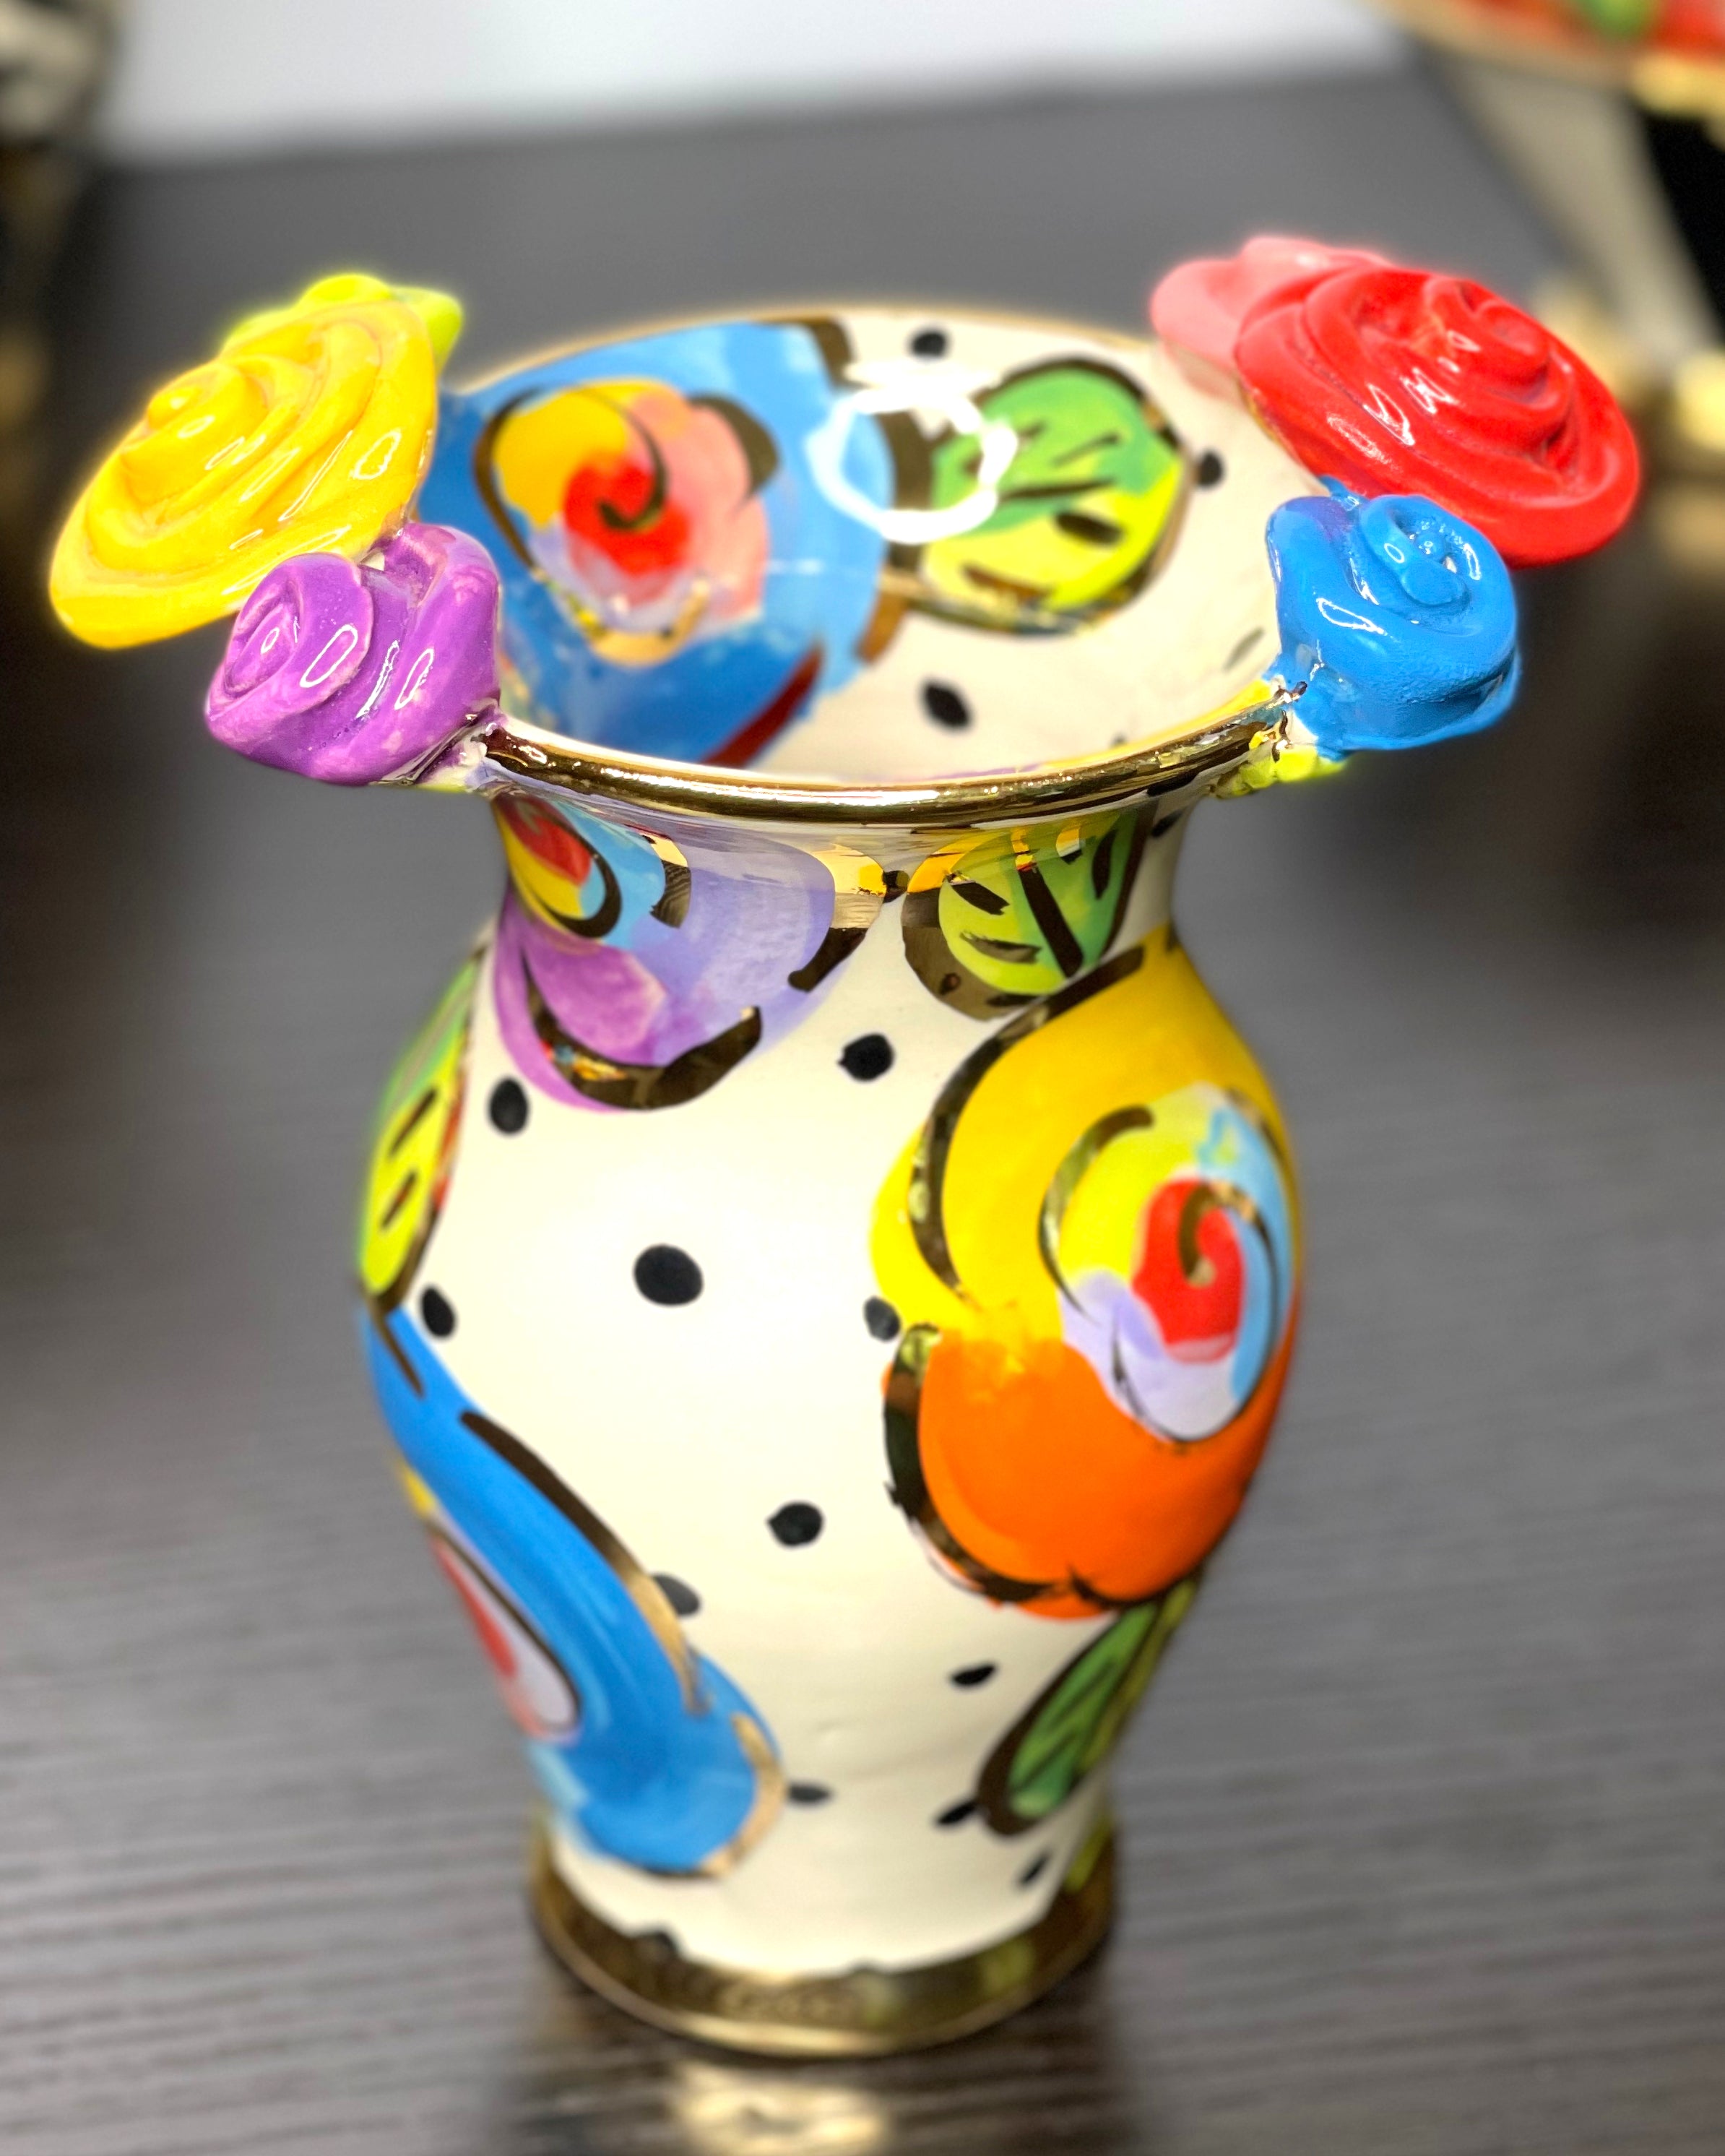 Mary Rose Young Rose Vase with colorful flowers